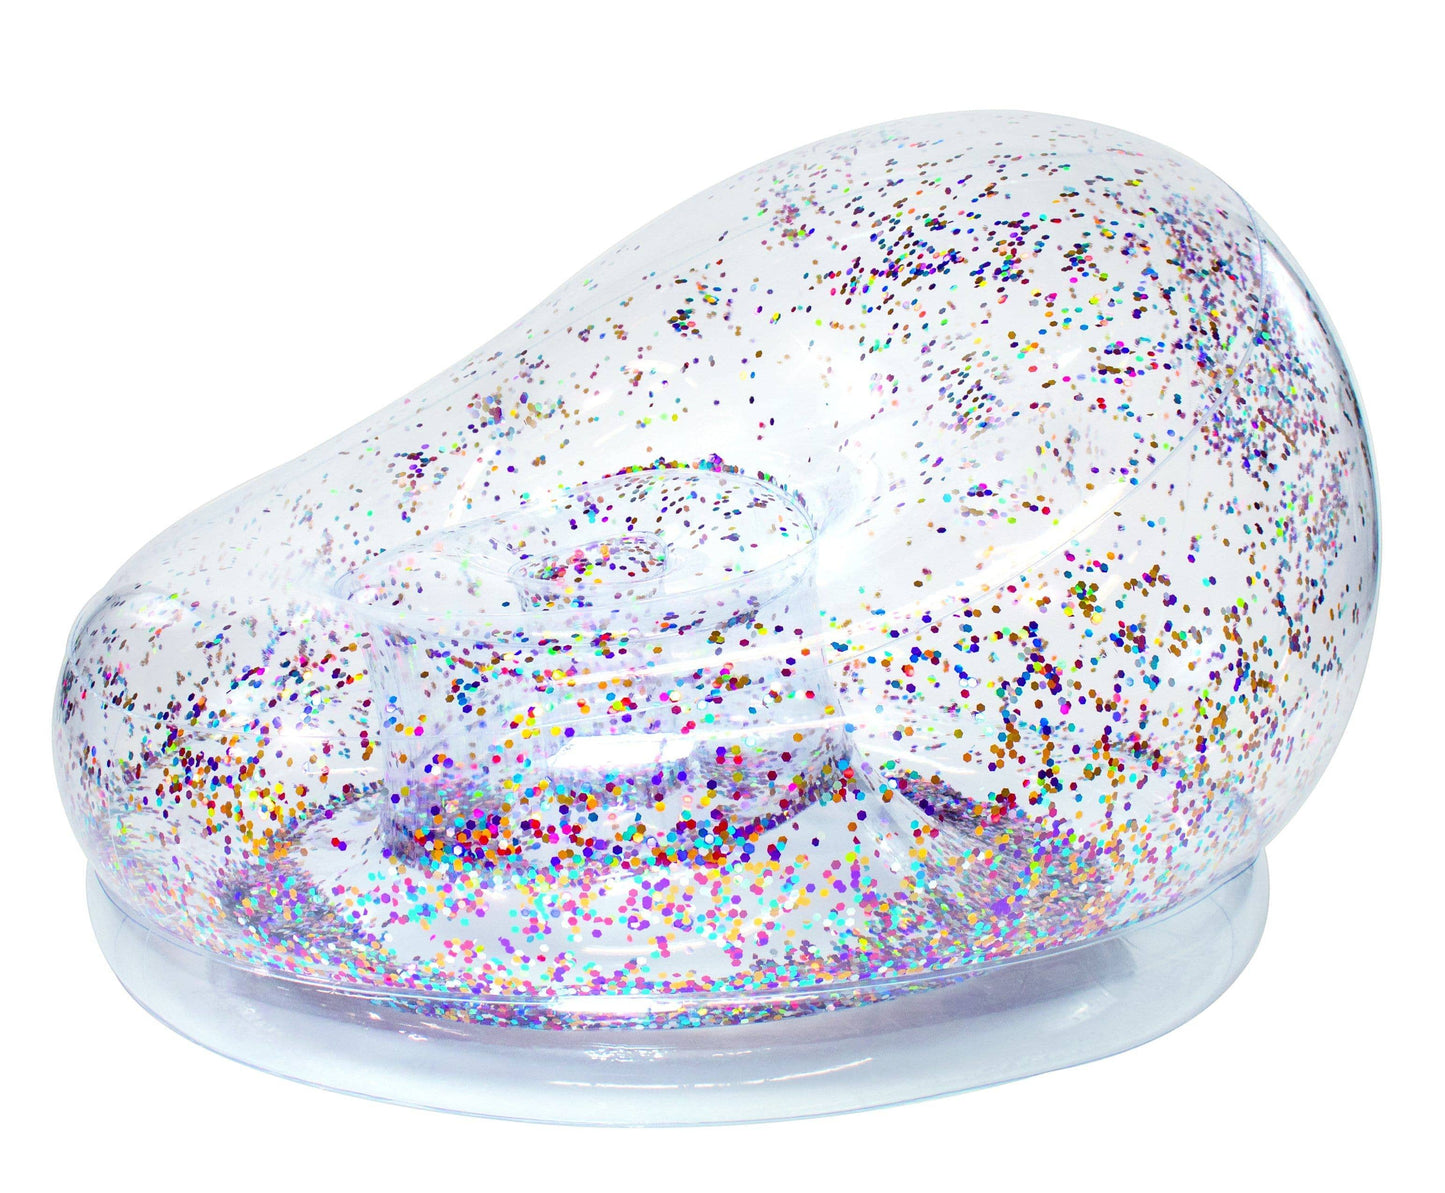 Inflatable Chair BloChair in Multi-Color Glitter AirCandy